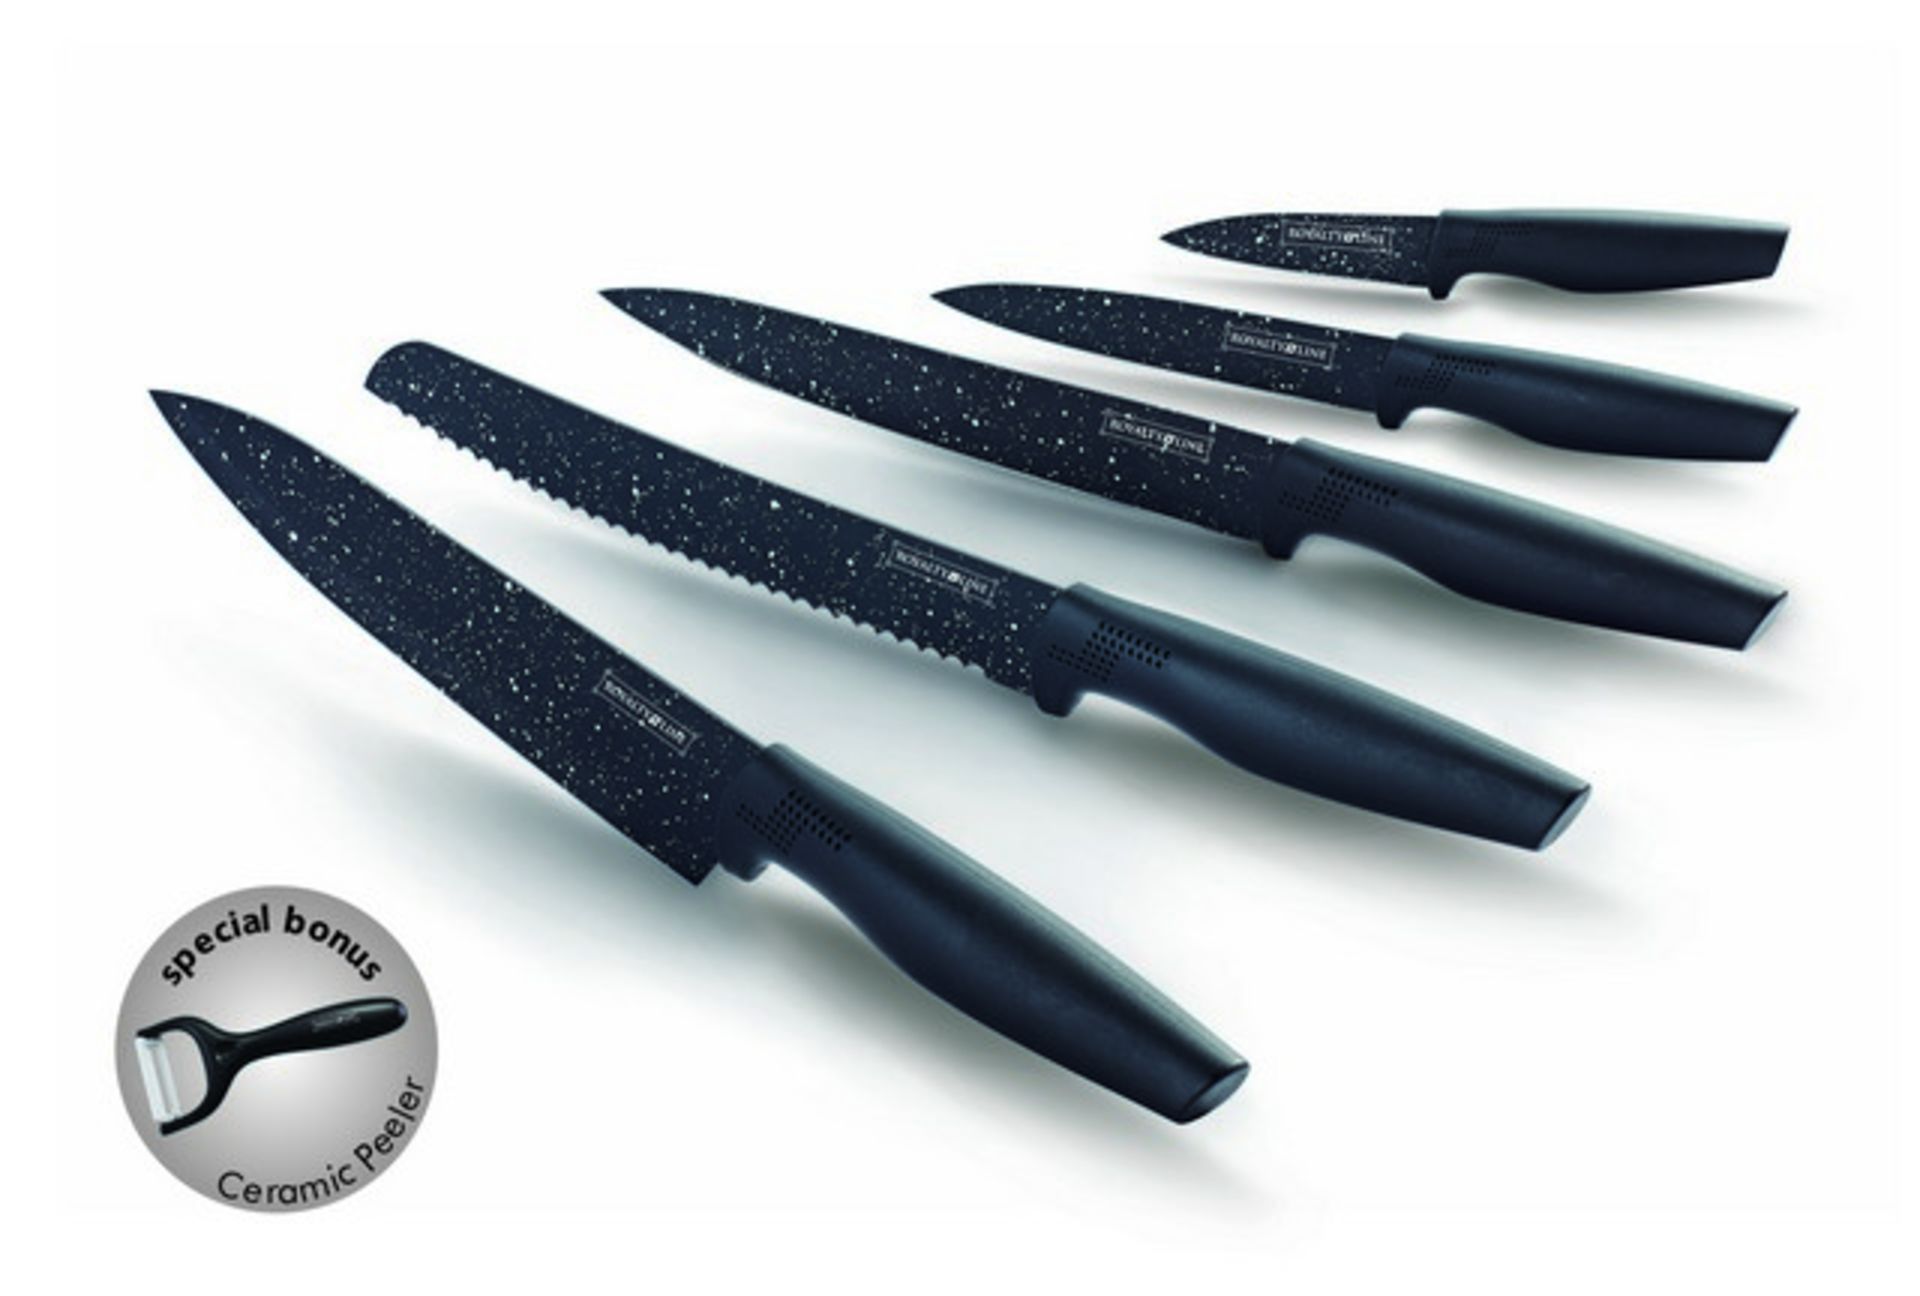 V Brand New Six Piece Non-Stick Coating Knife Set Including 8 Inch Chef Knife - 8 Inch Bread Knife -